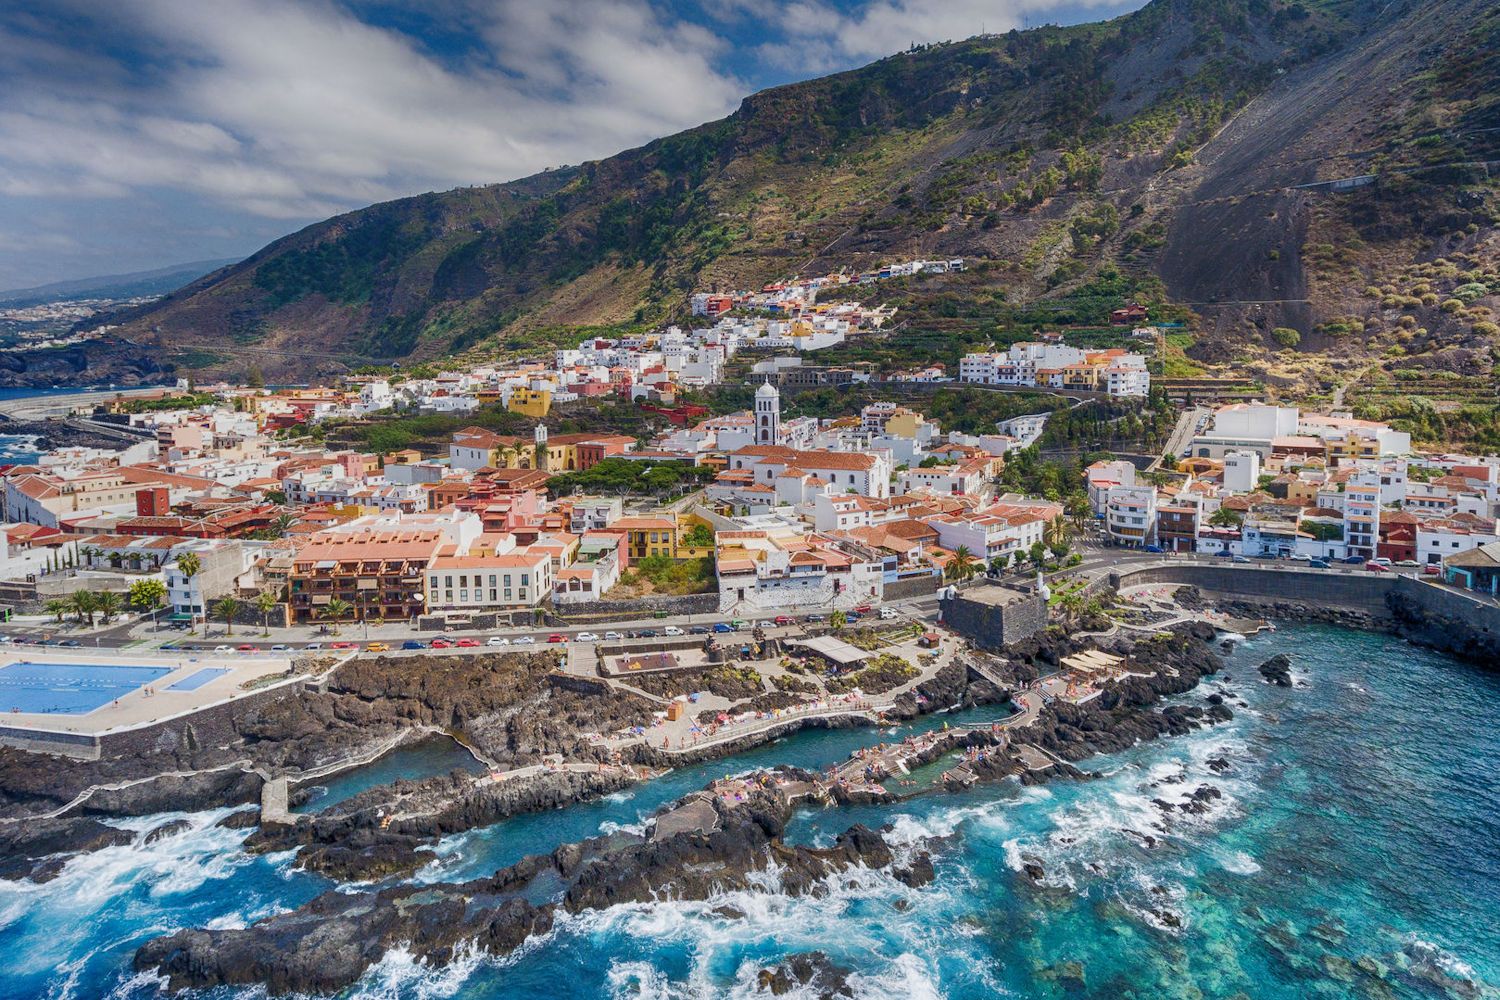 The natural pools of Garachico are a popular tourist attraction in Tenerife